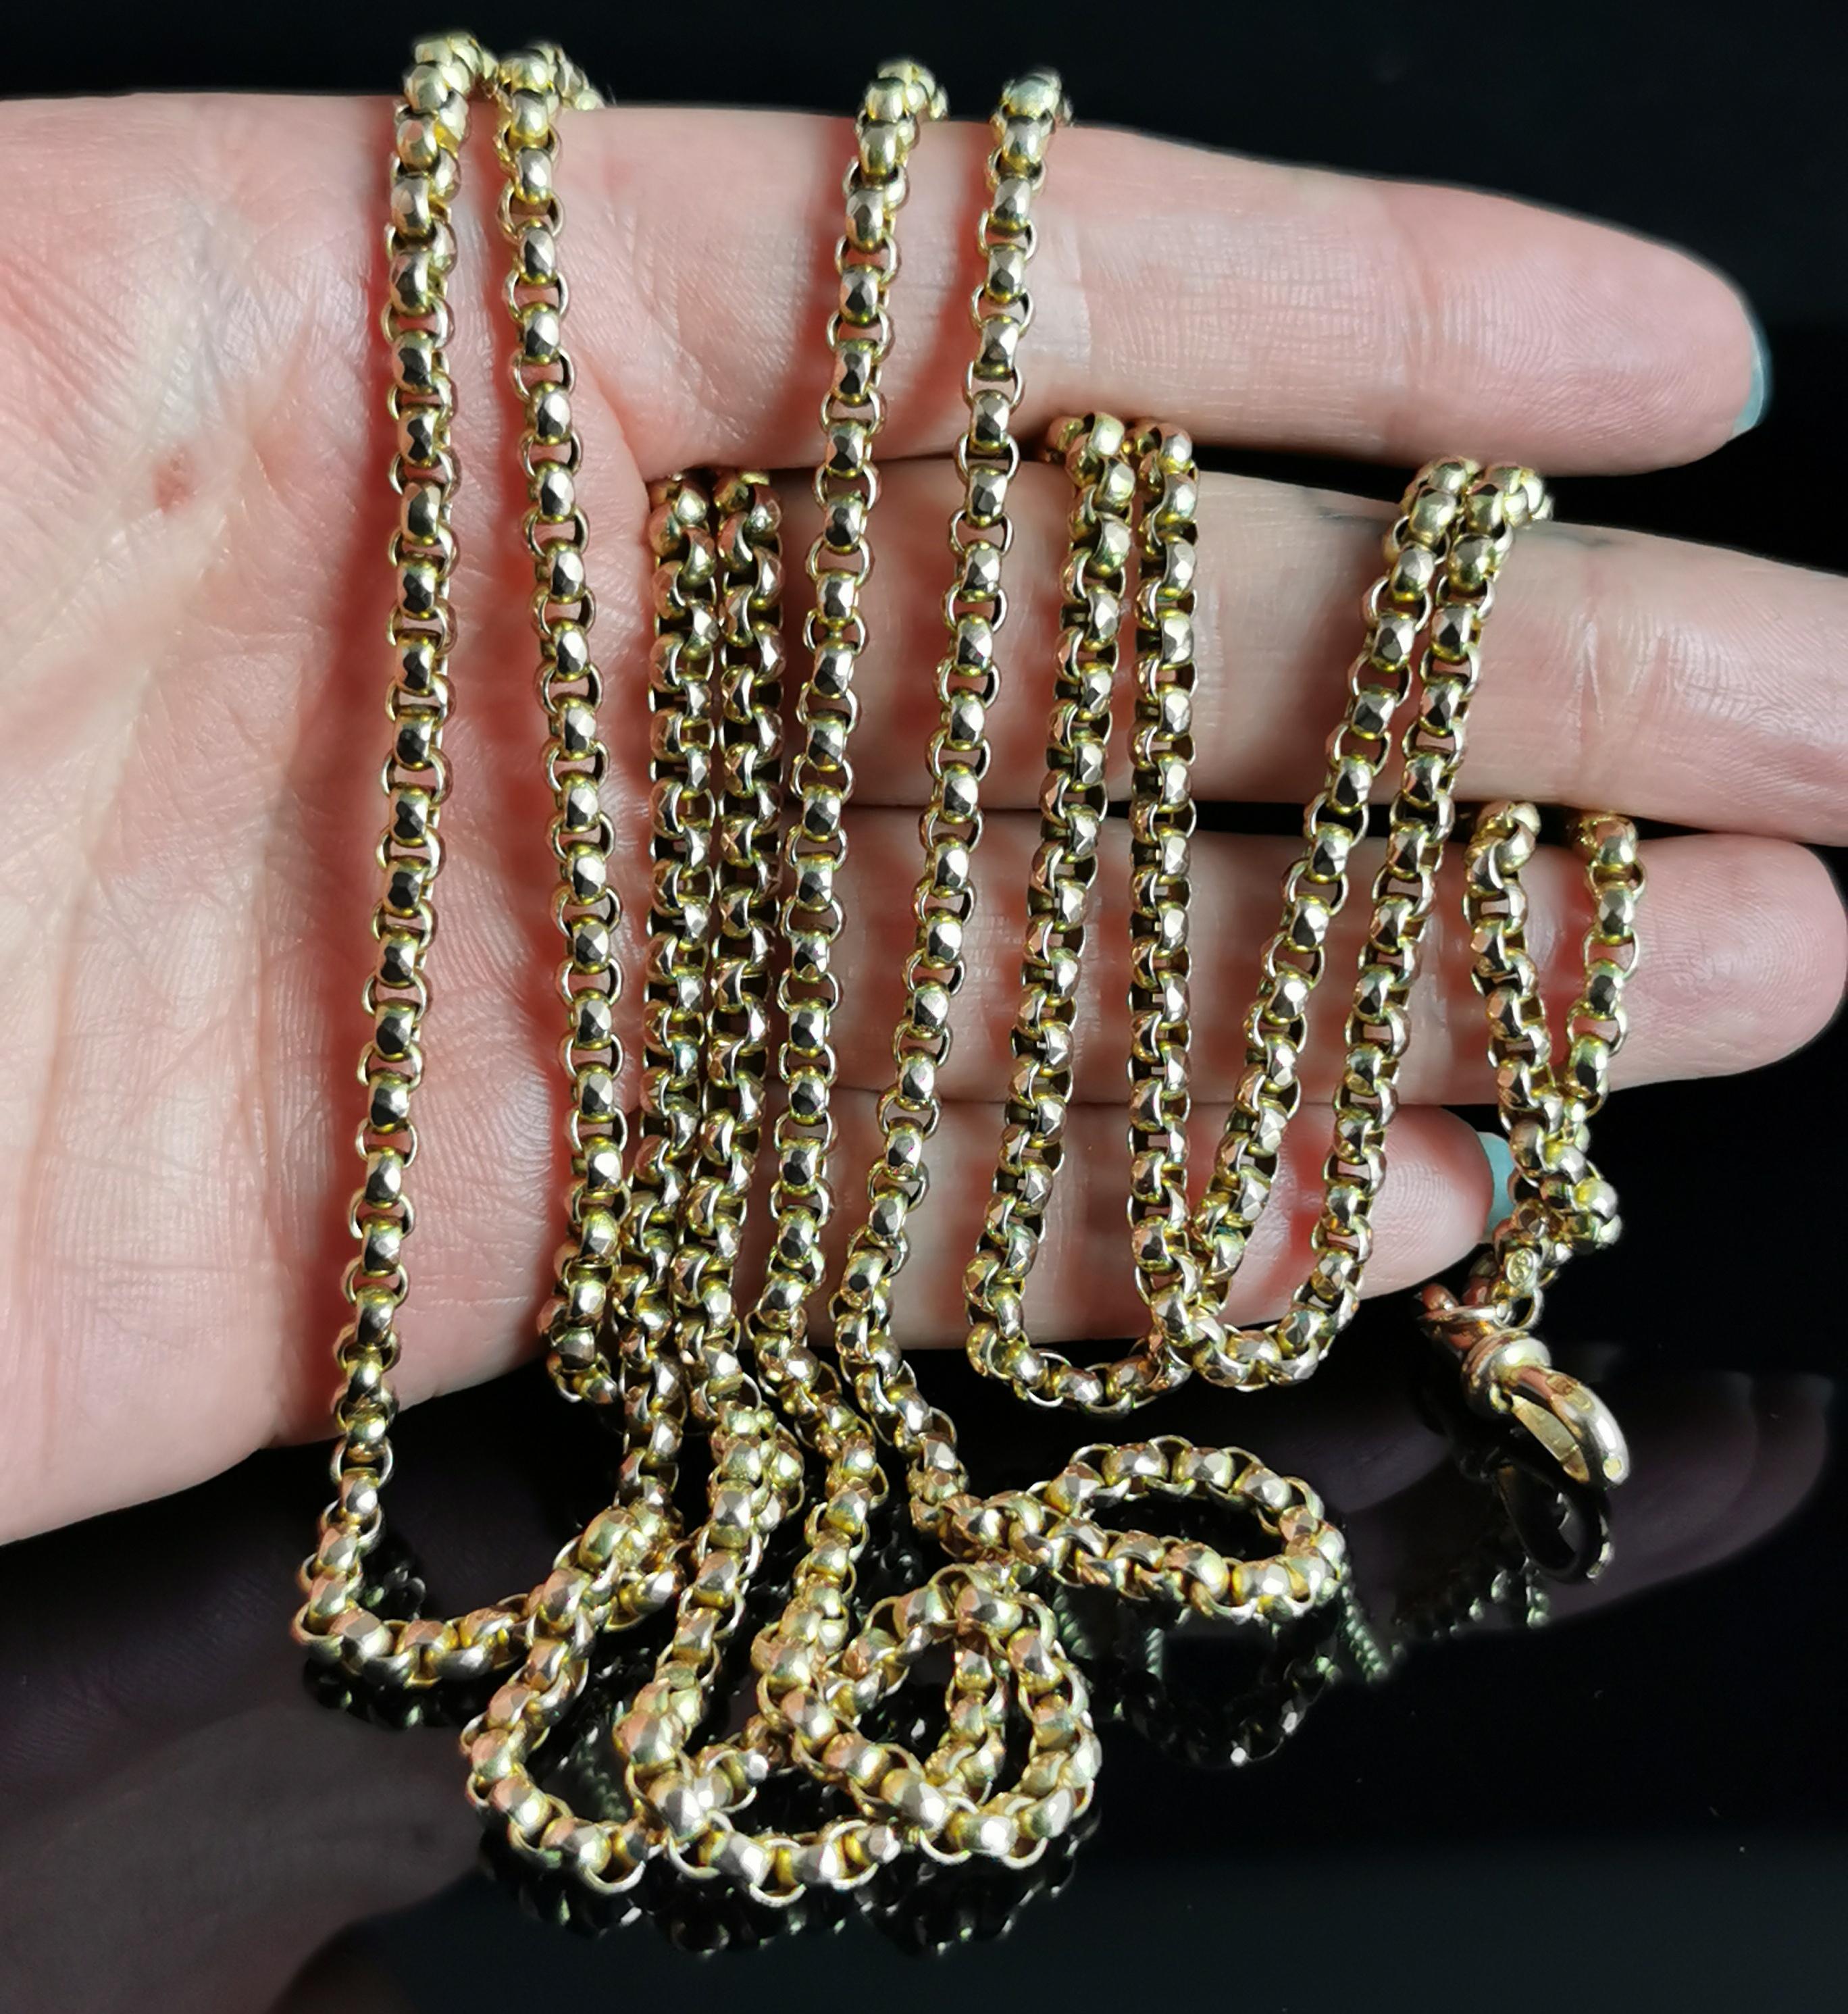 Women's or Men's Antique 9k Yellow Gold Longuard Chain Necklace, Muff Chain, Victorian